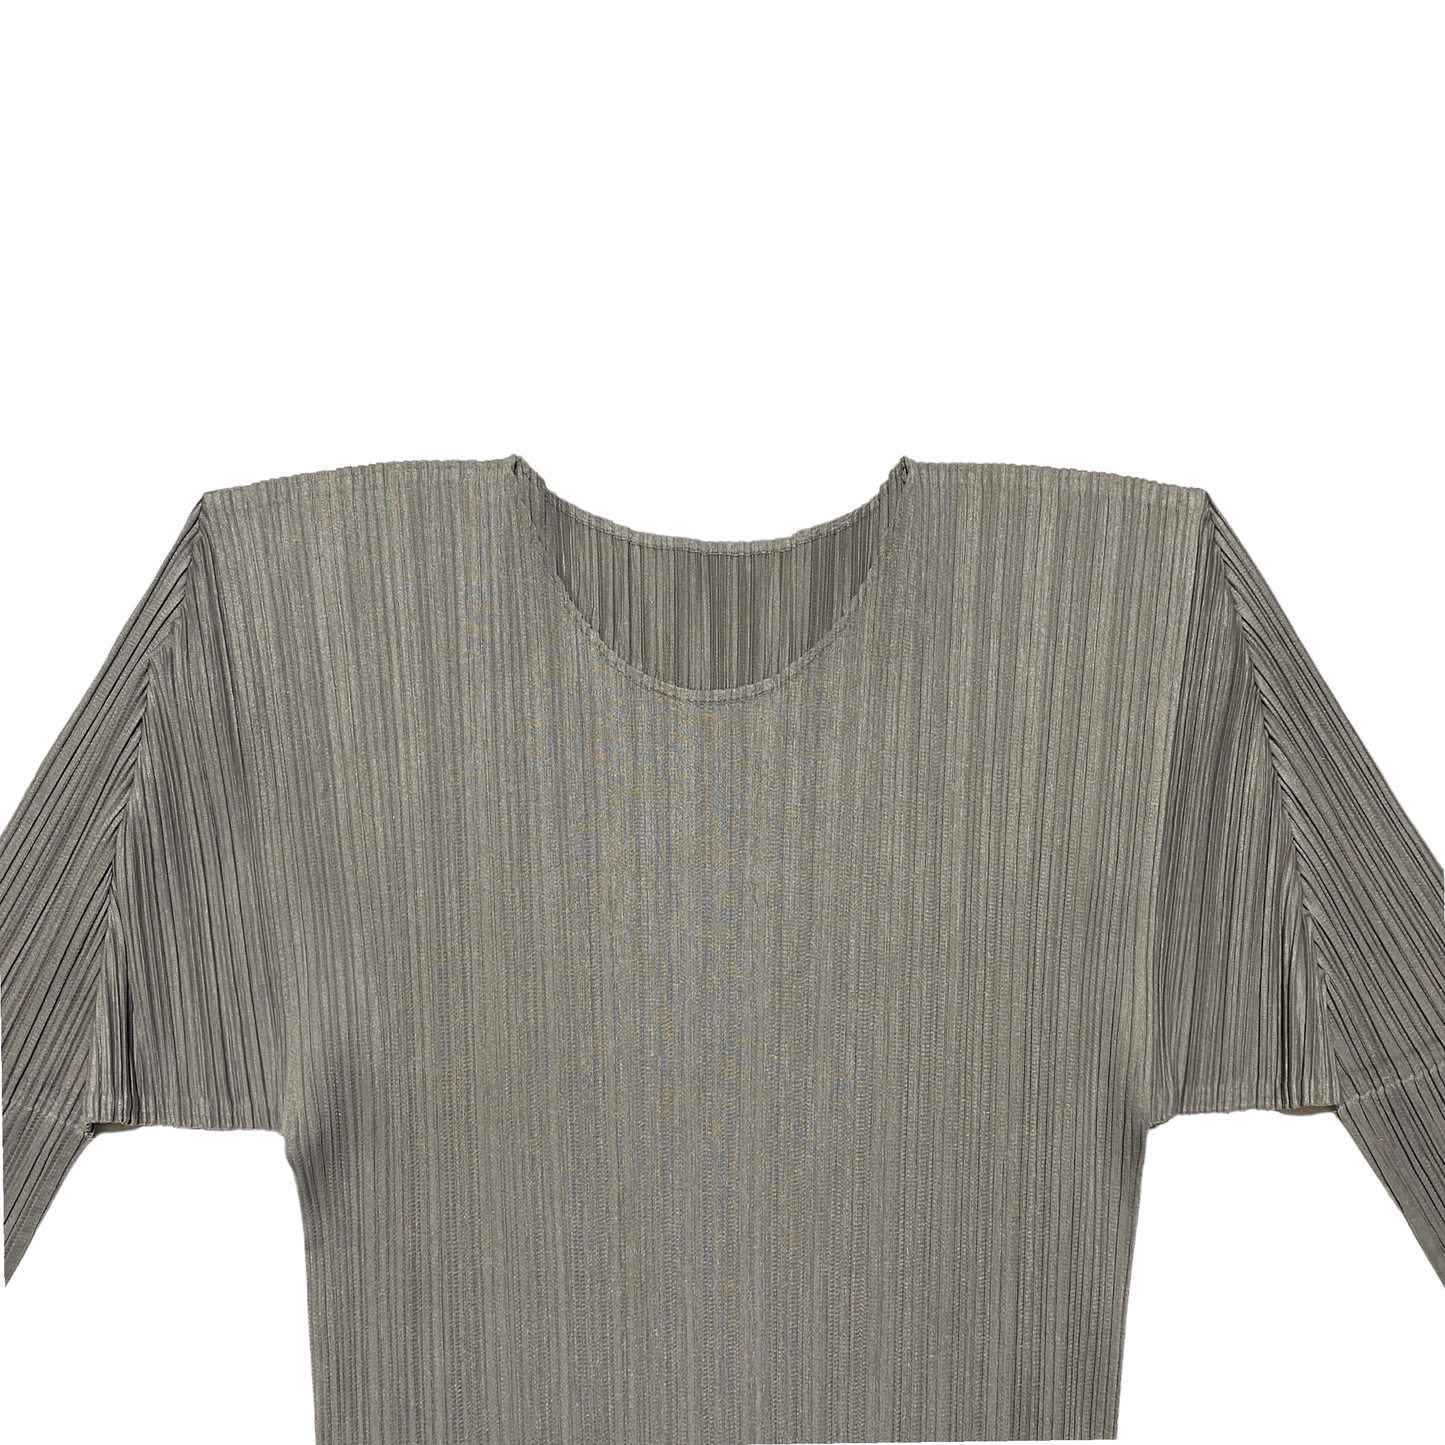 00's Issey Miyake Pleats Please Pleated Blouse (S/M)